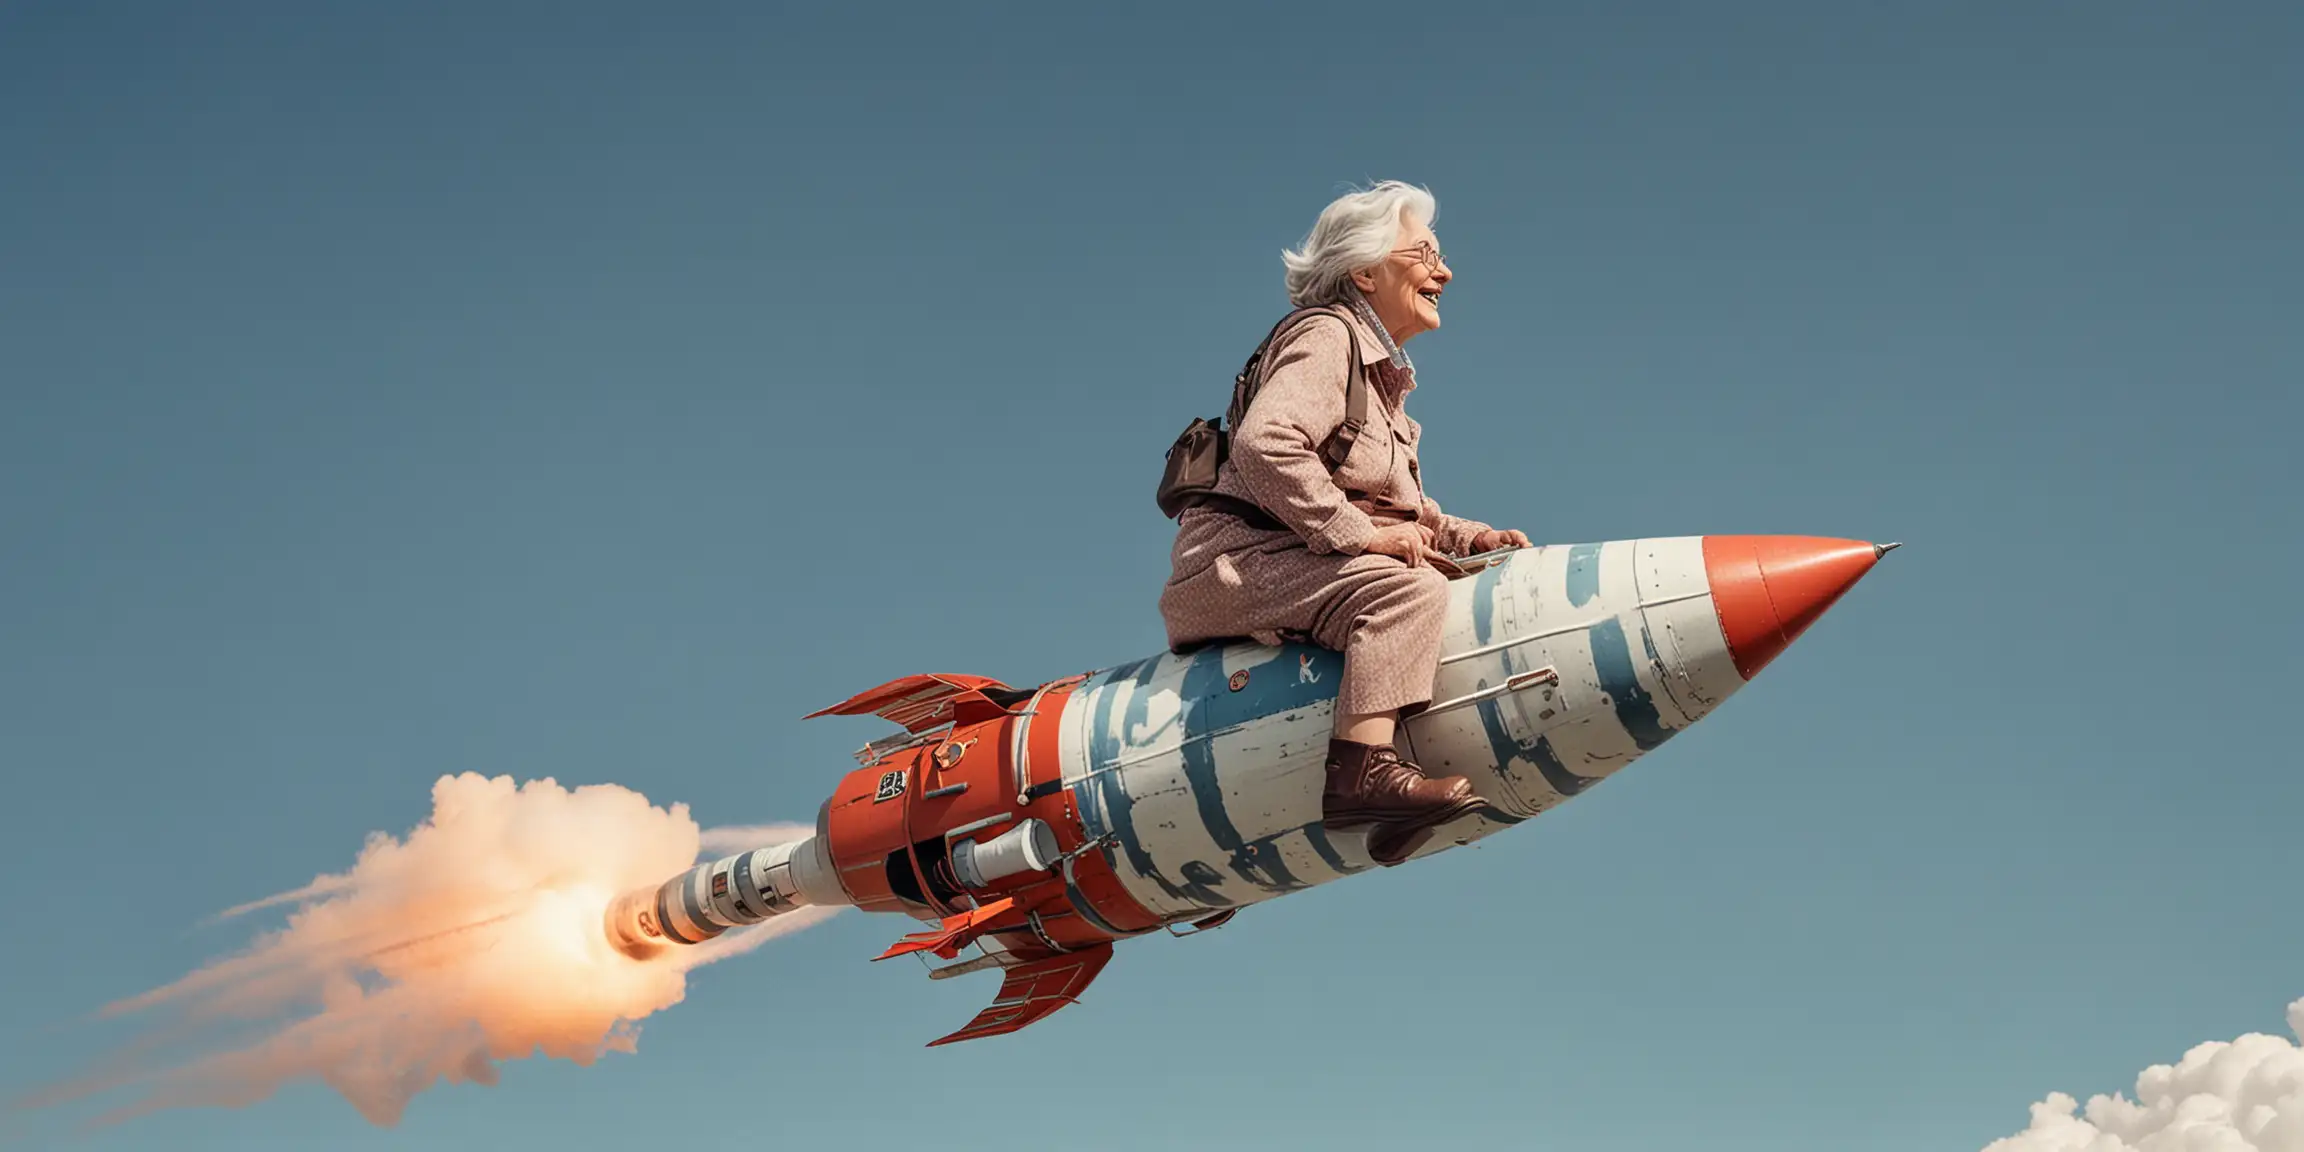 OLD LADY WITH GRAY HAIR RIDING A ROCKET ON A BLUE SKY